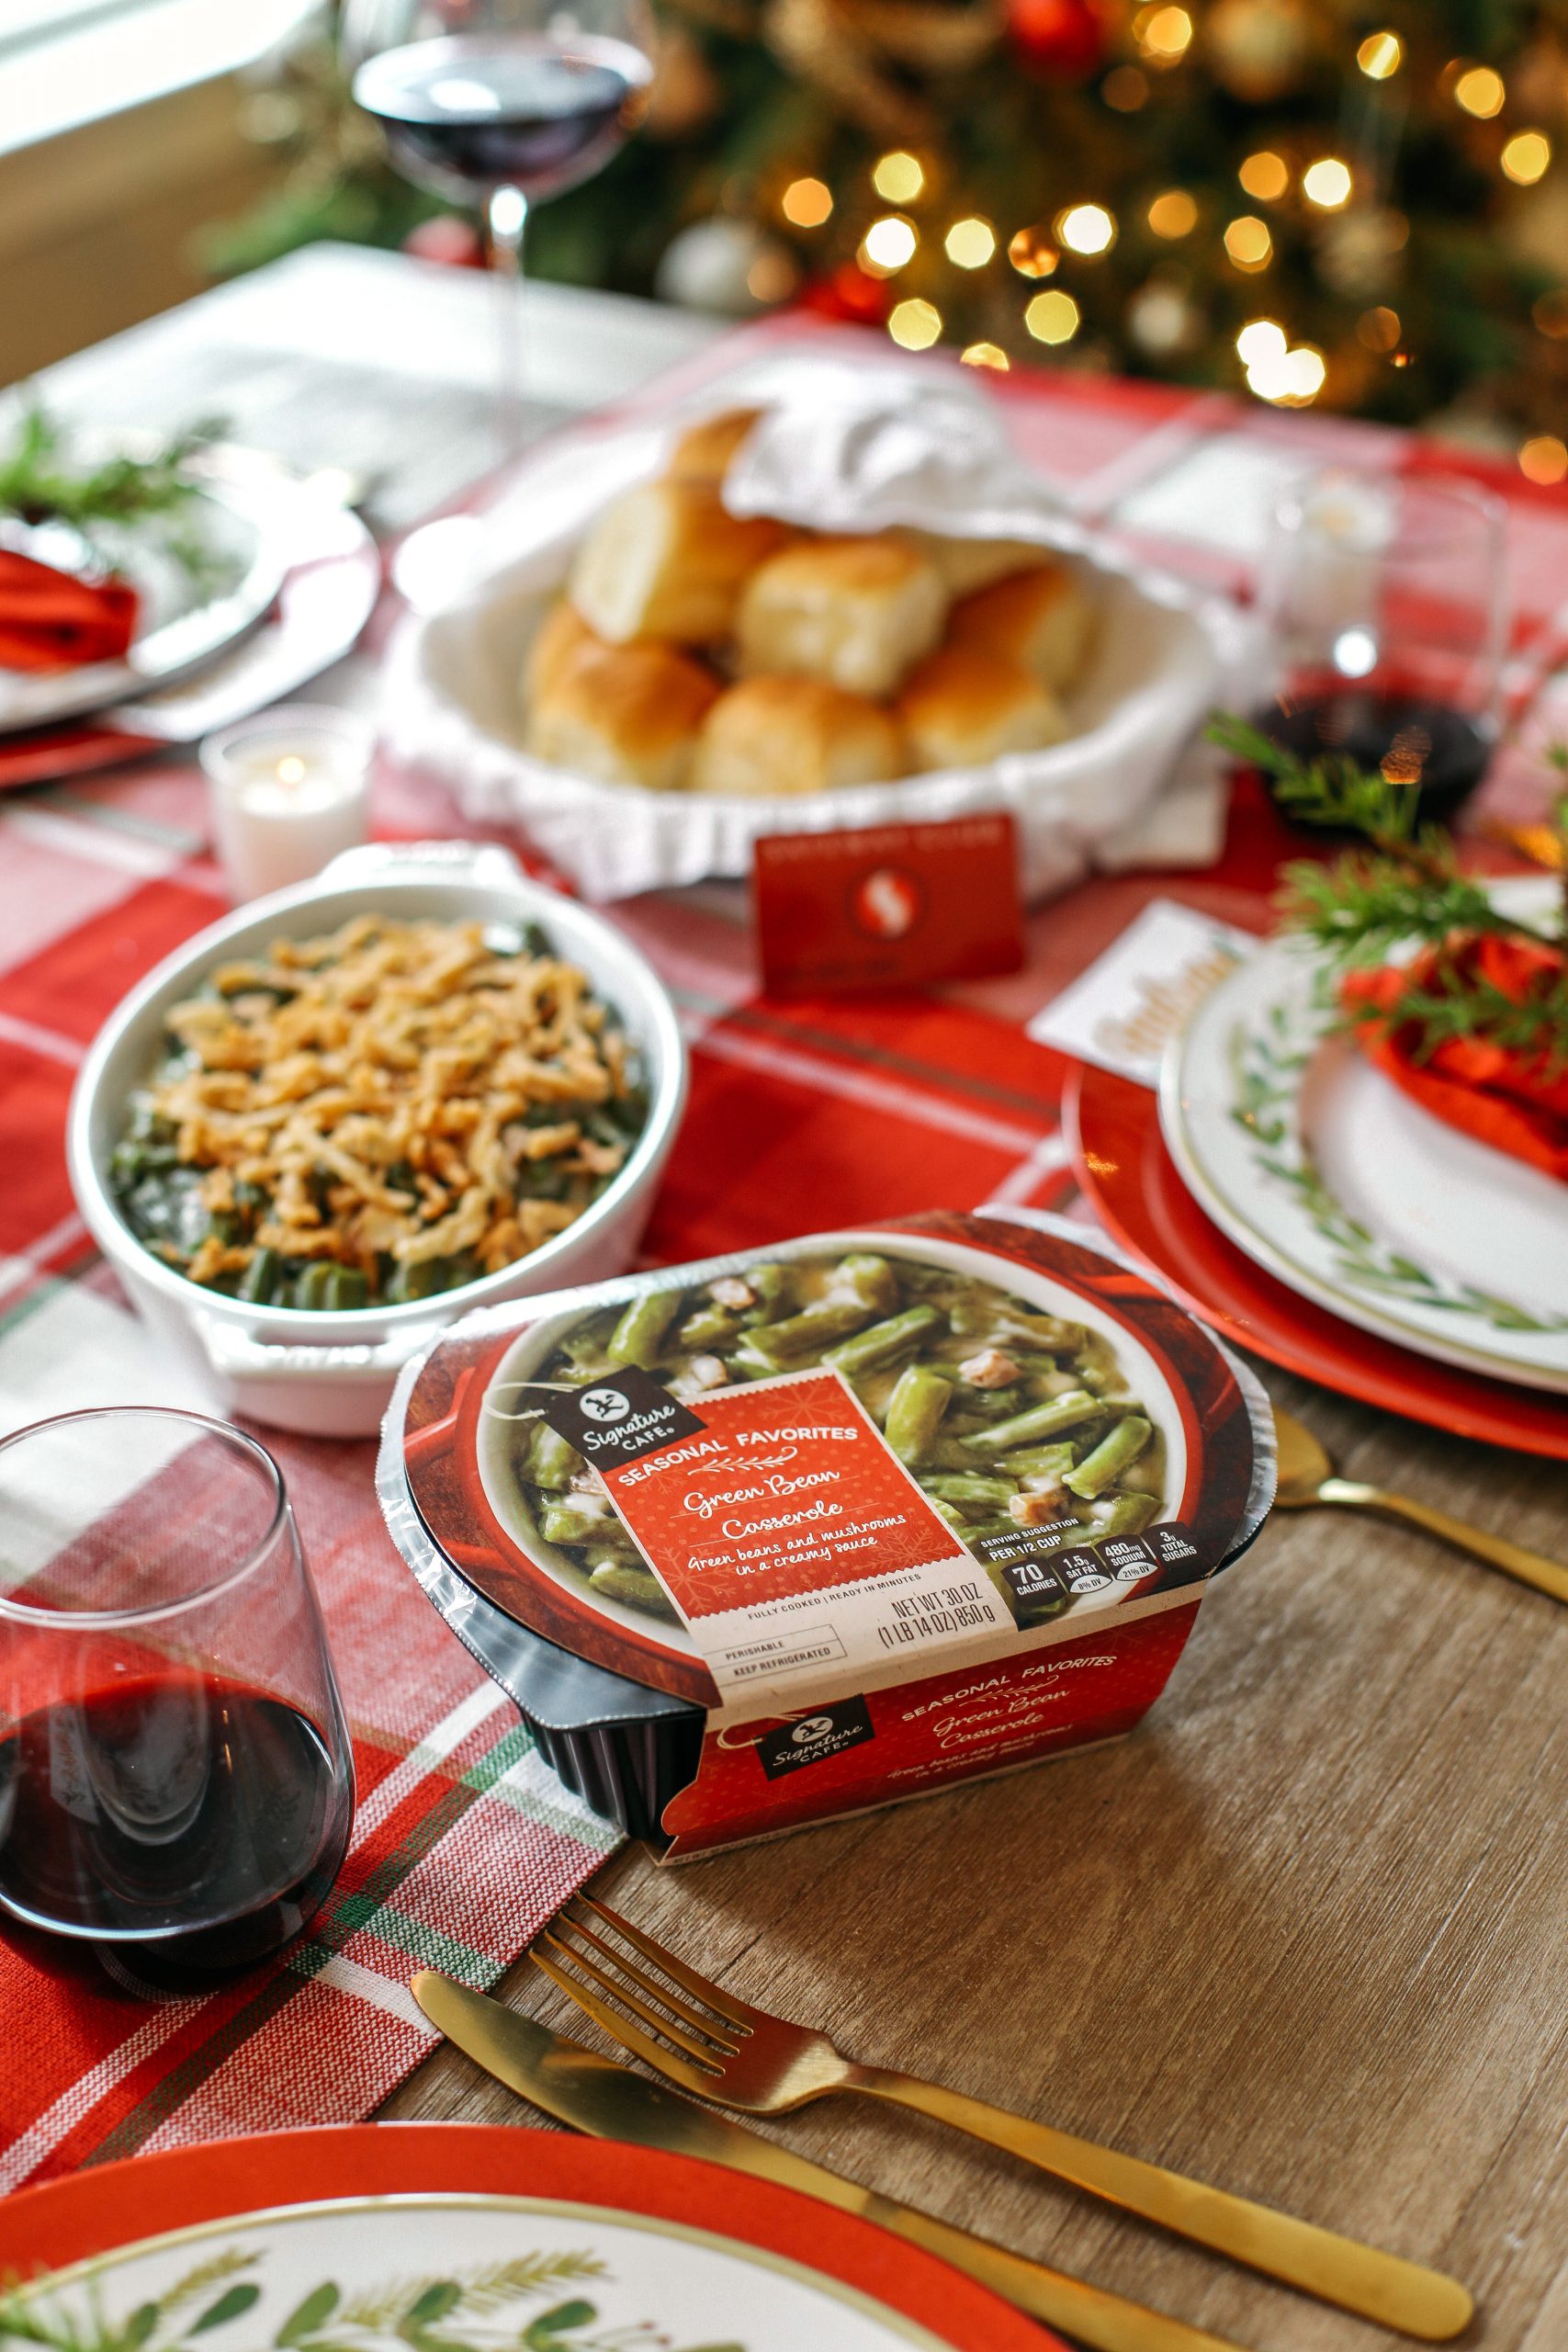 Celebrate the season and create lasting memories by a hosting a small holiday gathering this Christmas with classic dishes your family is sure to enjoy! 